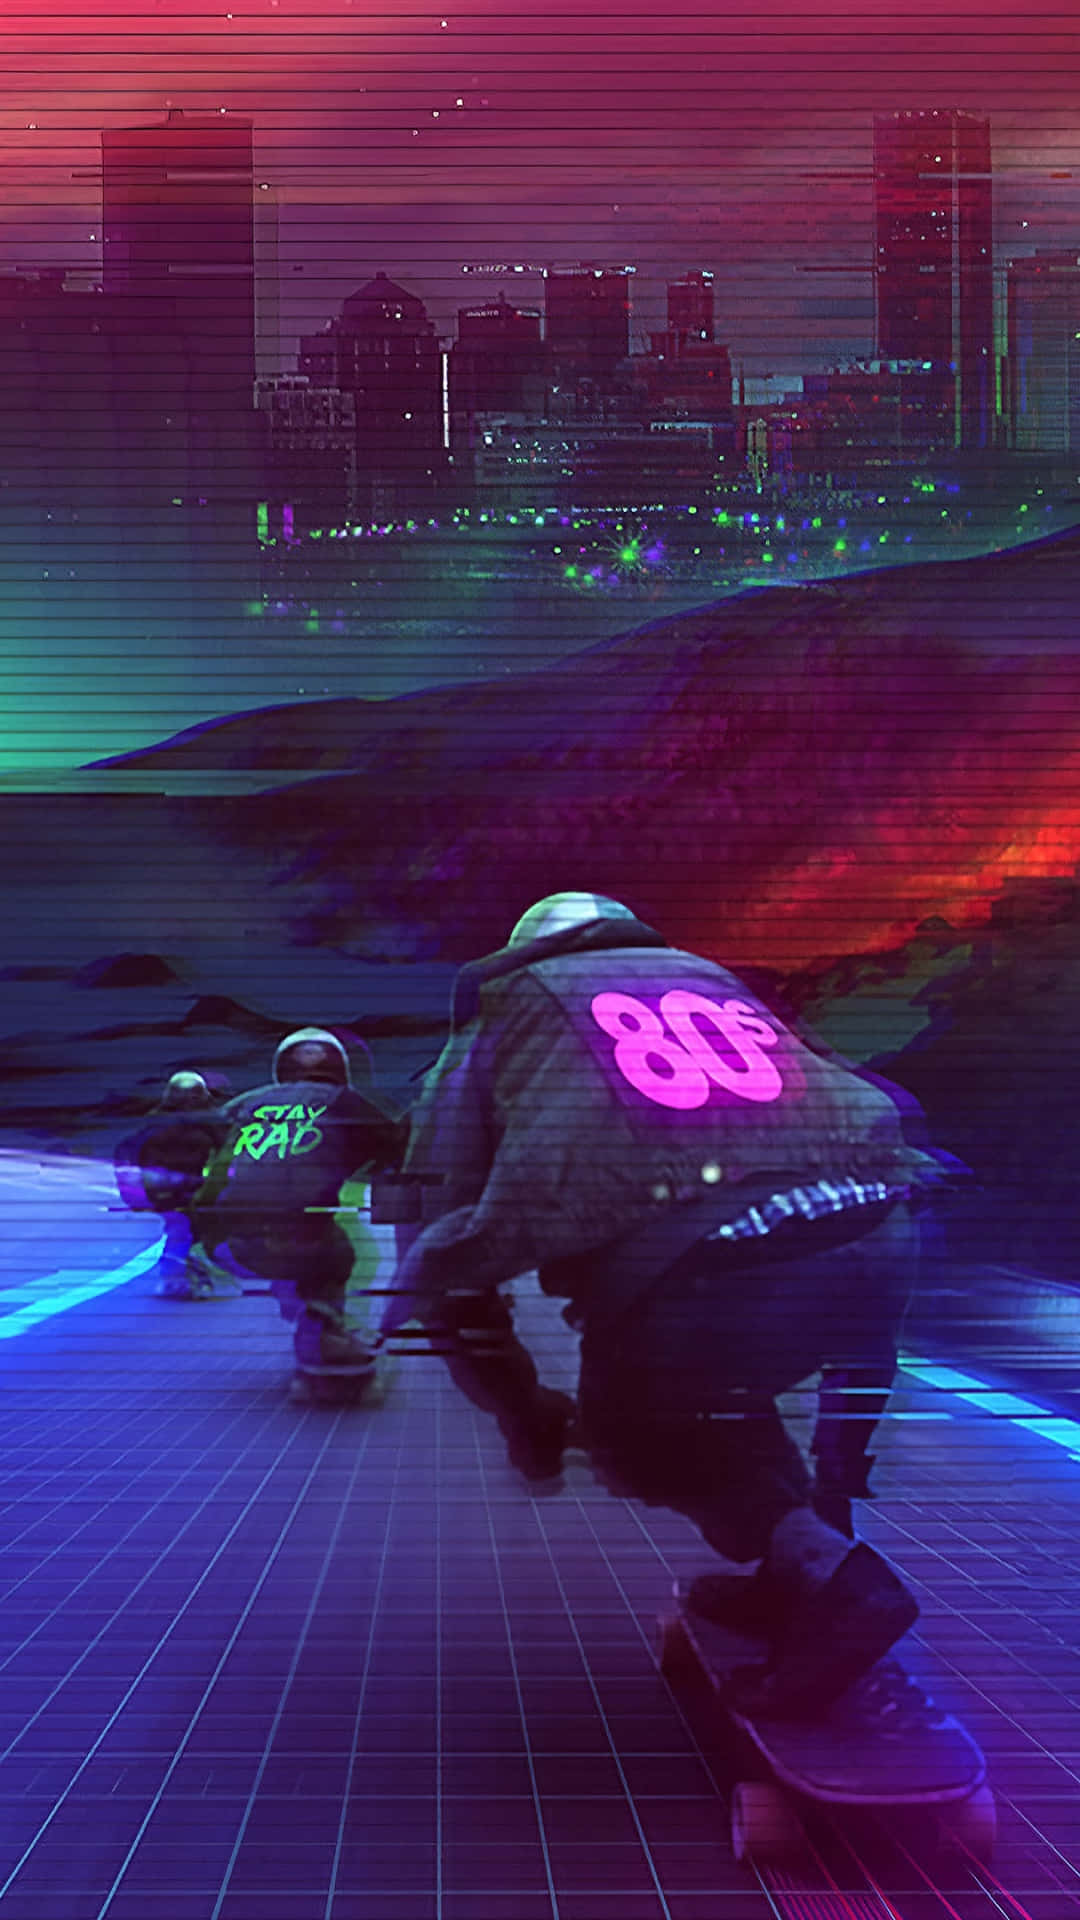 A Skateboarder Is Riding Down A Street With Neon Lights Wallpaper